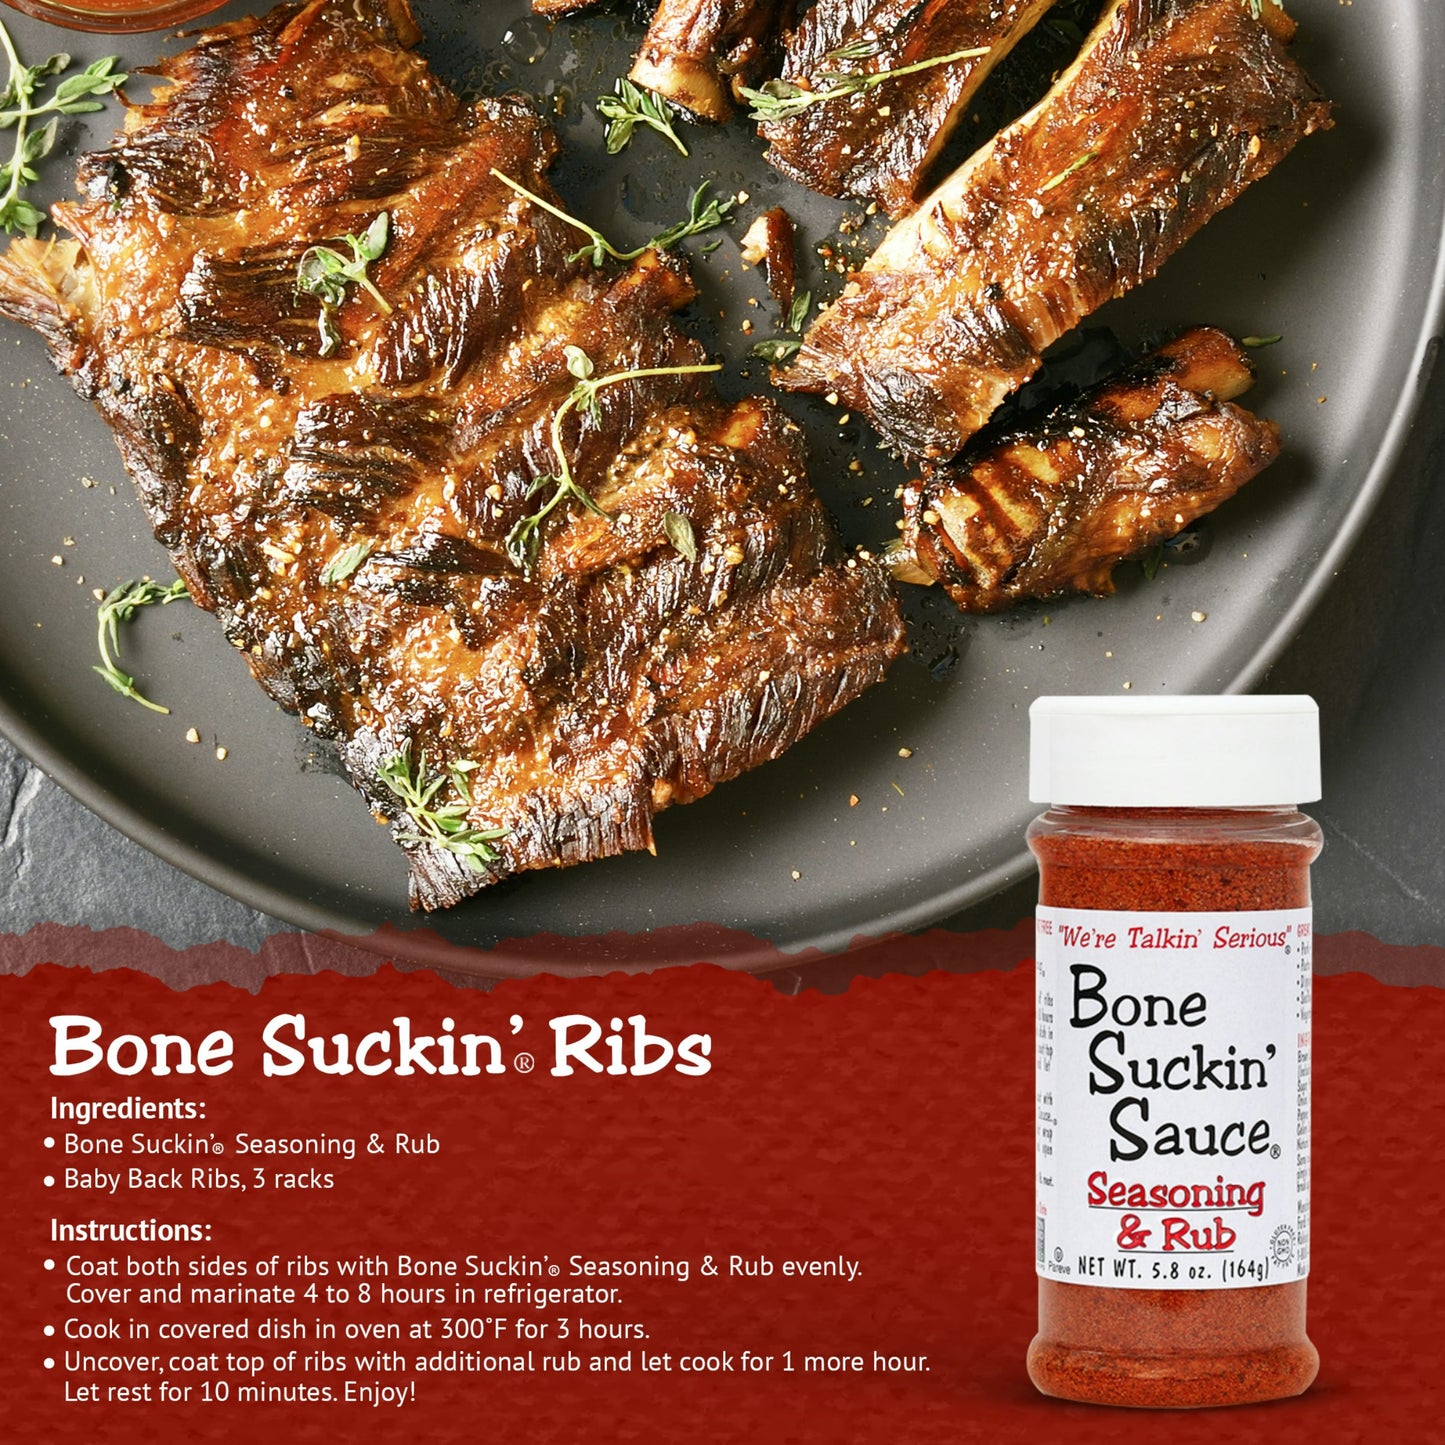 Bone Suckin Ribs Recipe. Ingredients: Bone Suckin Seasoning & Rub. Baby back ribs, 3 racks. Instructions: Coat both sides of ribs with Bone Suckin Seasoning evenly. Cover and marinate 4 to 8 hours in refrigerator. Cook in covered dish in oven at 300 F for 3 hours. Uncover, coat top of ribs with additional rub and let cook for 1 more hour. Let rest for 10 minutes. Enjoy!